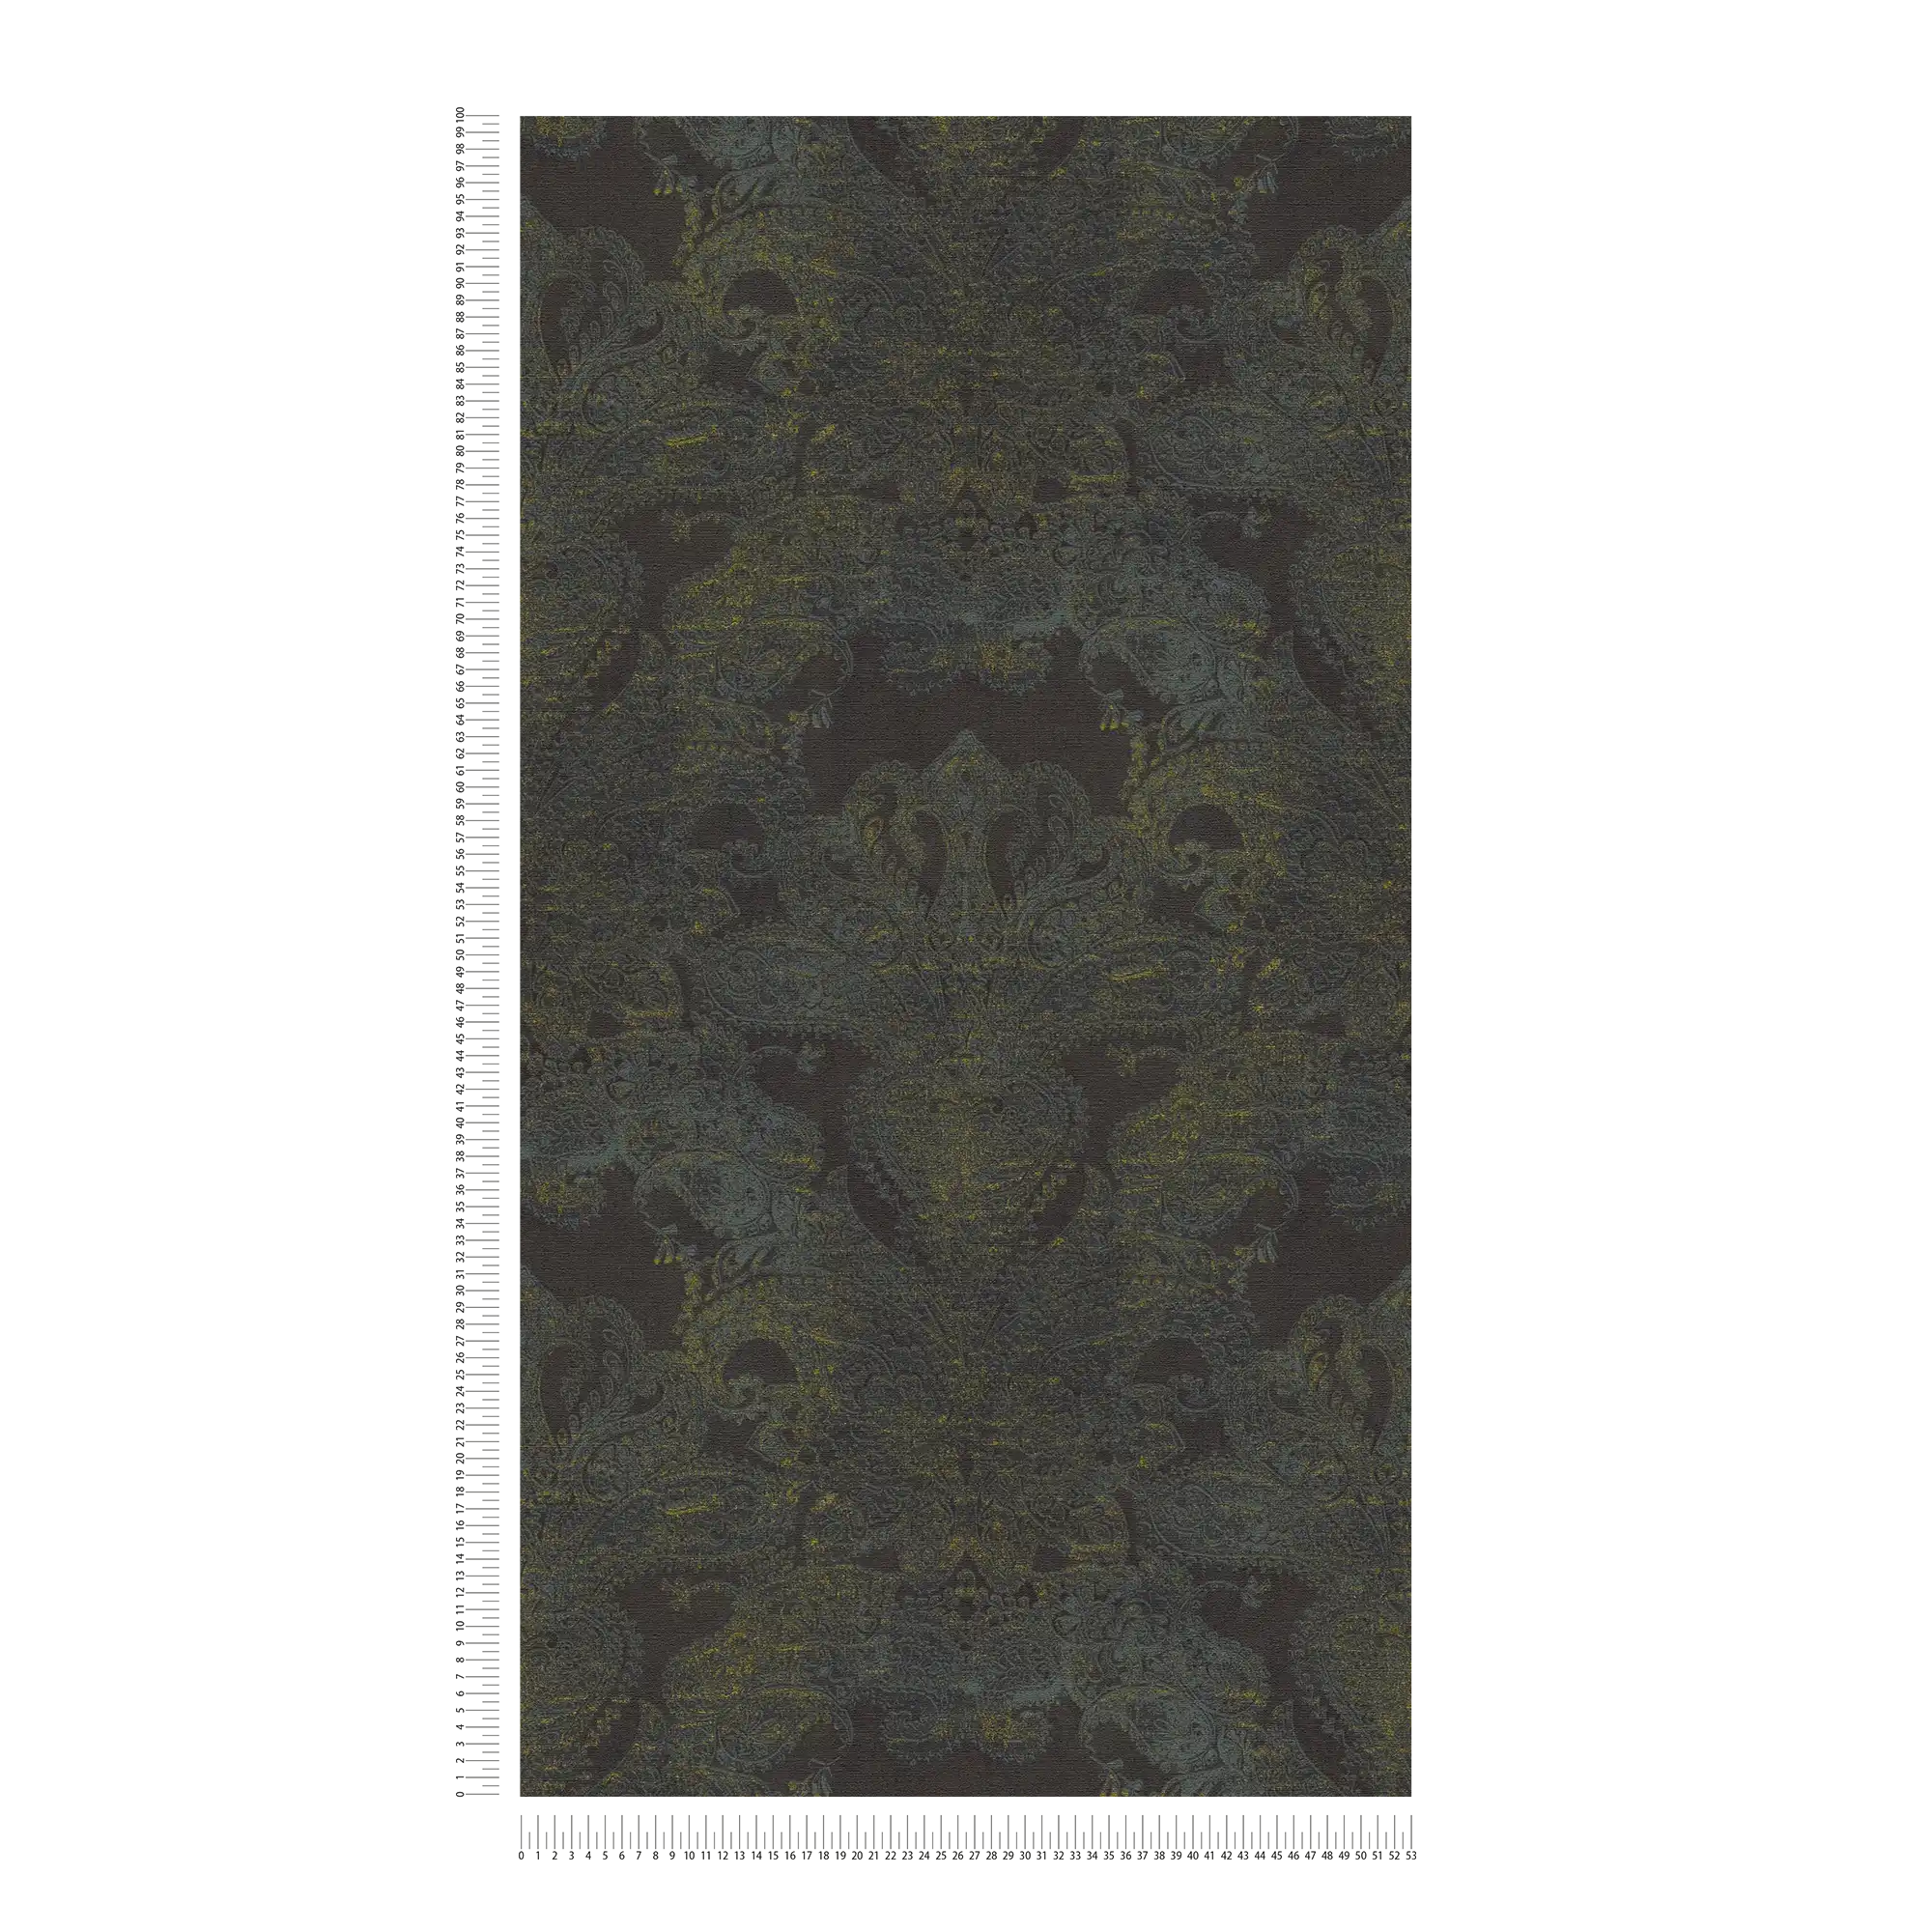             Baroque style non-woven wallpaper with ornaments - black, blue, yellow
        